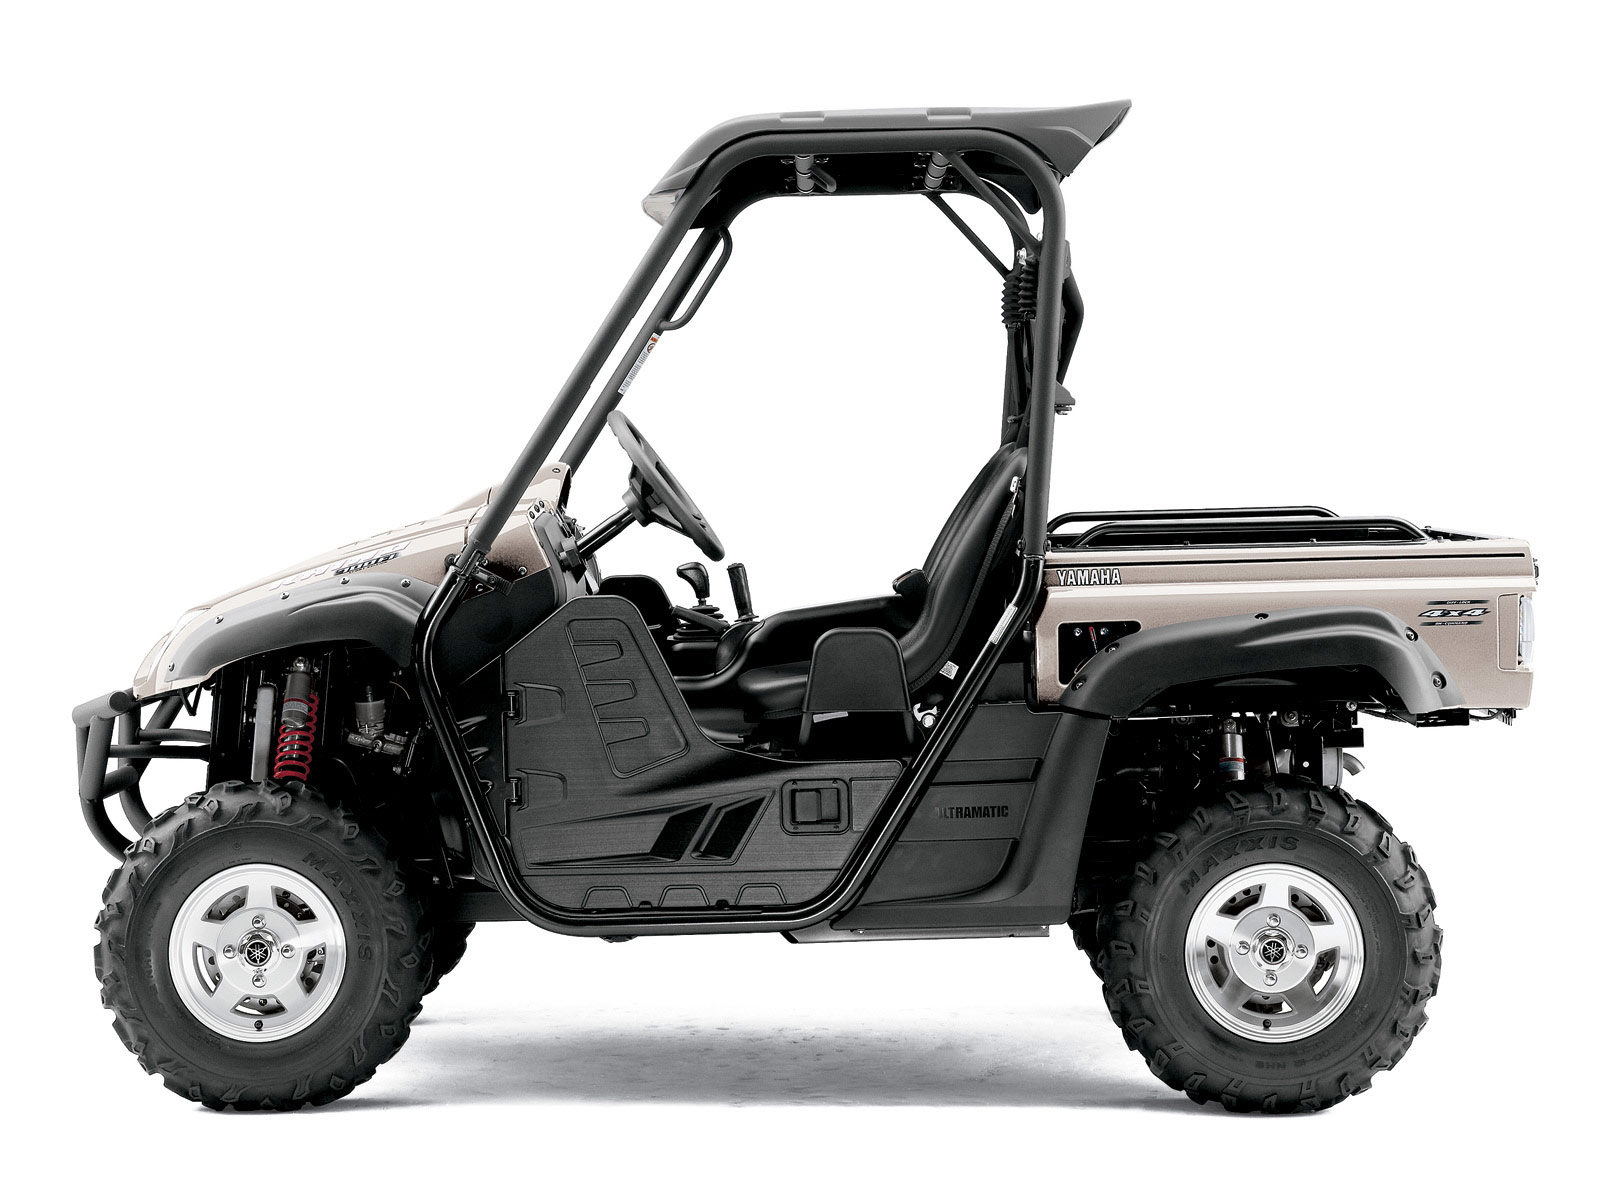 2012 Yamaha Rhino 700 FI Auto 4x4 Sport Edition Deluxe Review